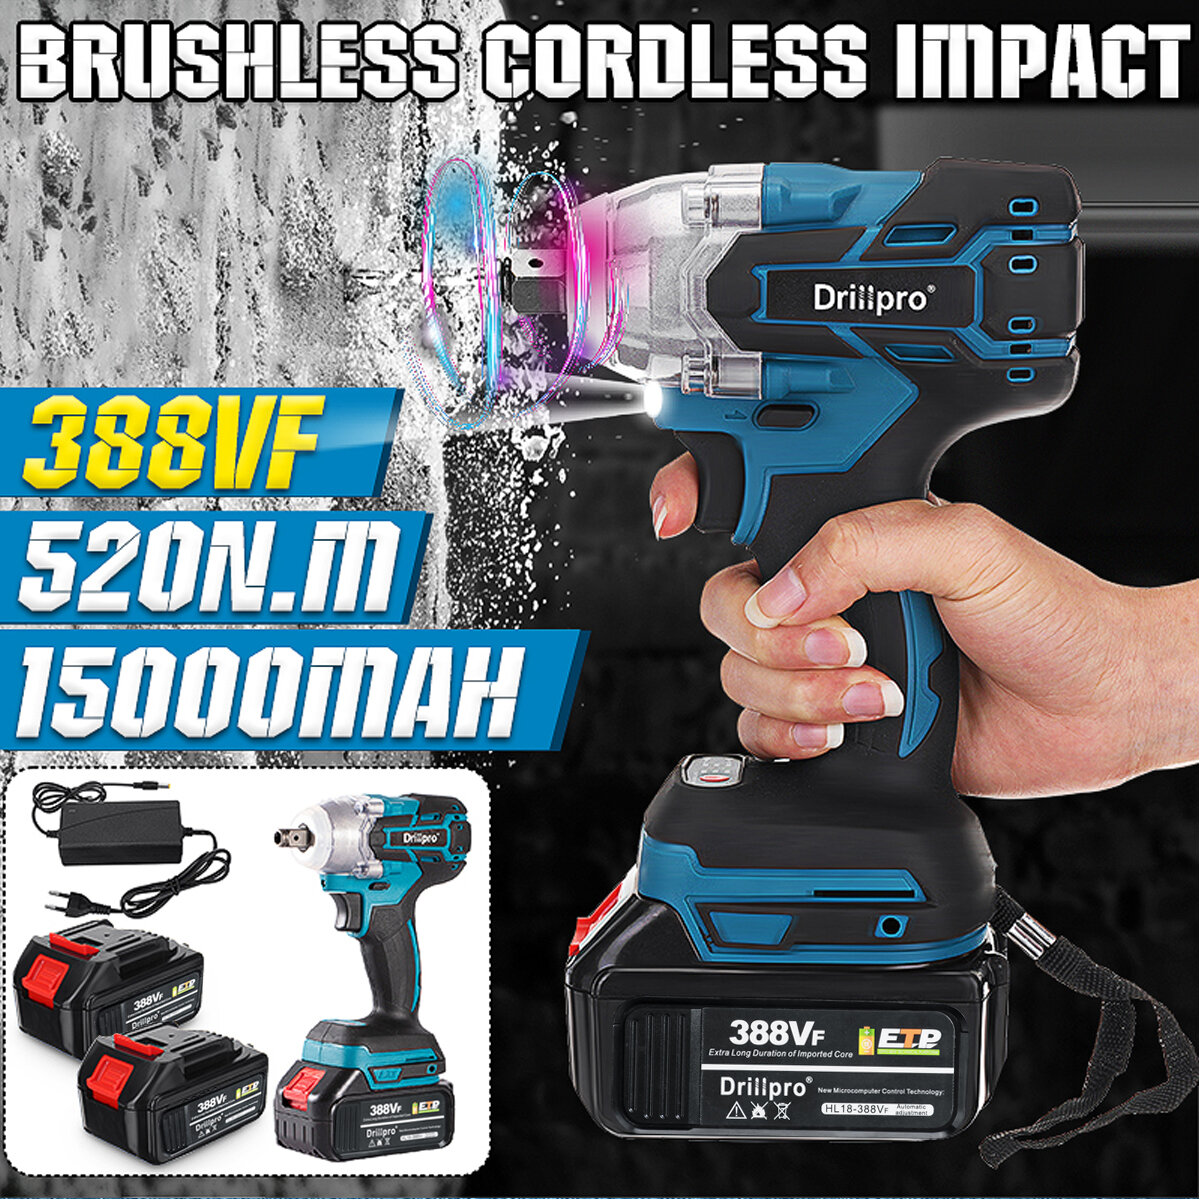 Drillpro 388VF 2 in1 520N.M Brushless Impact Cordless Electric Wrench Power Tool W/ 1/2 x Battery COD